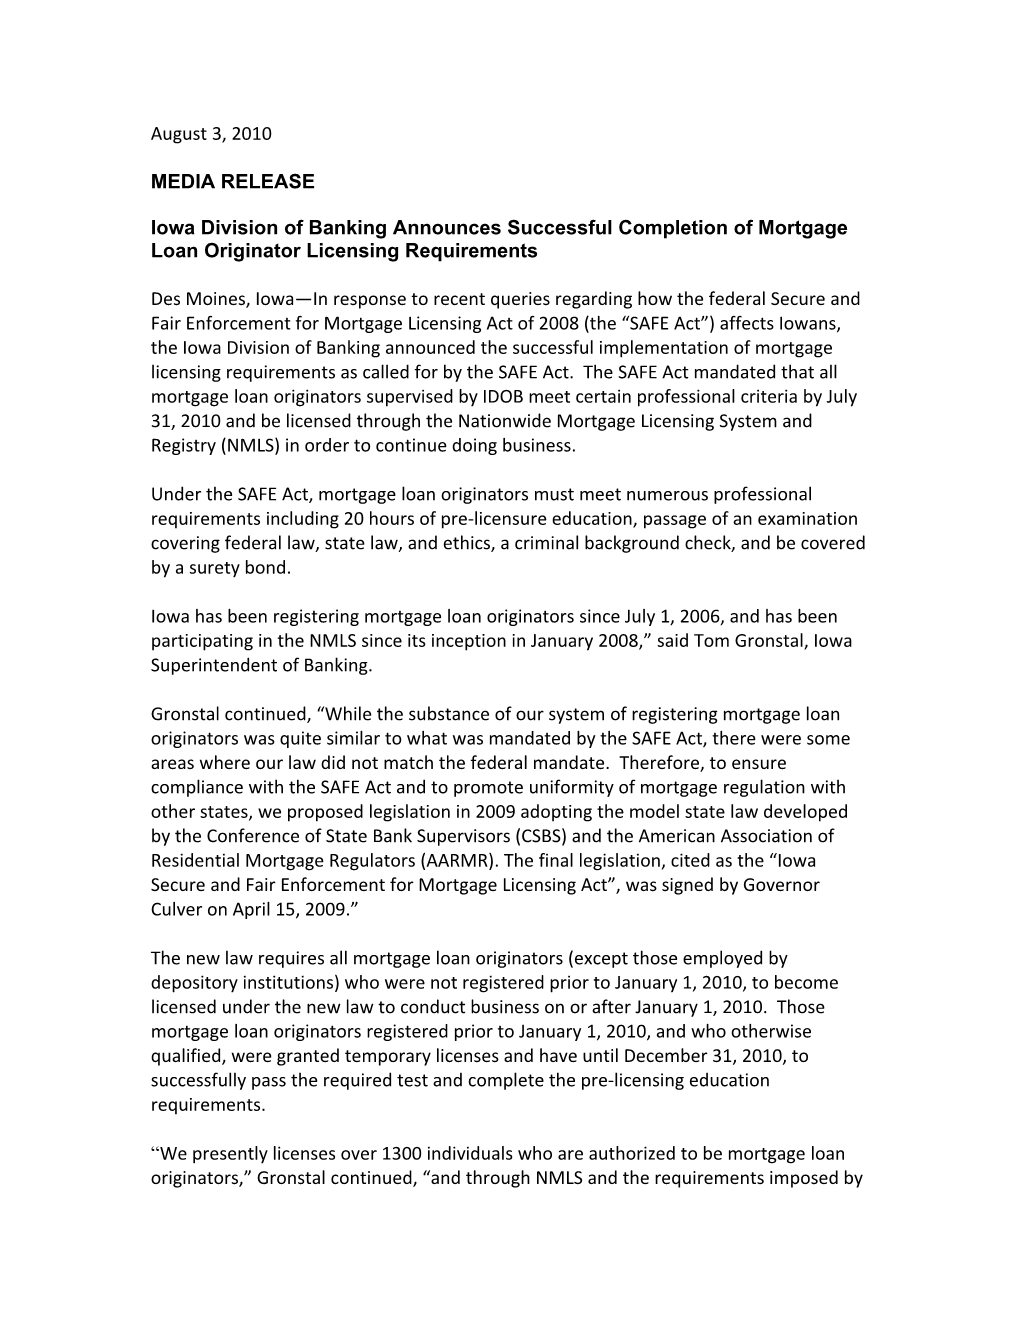 Iowa Division of Banking Announces Successful Completion of Mortgage Loan Originator Licensing